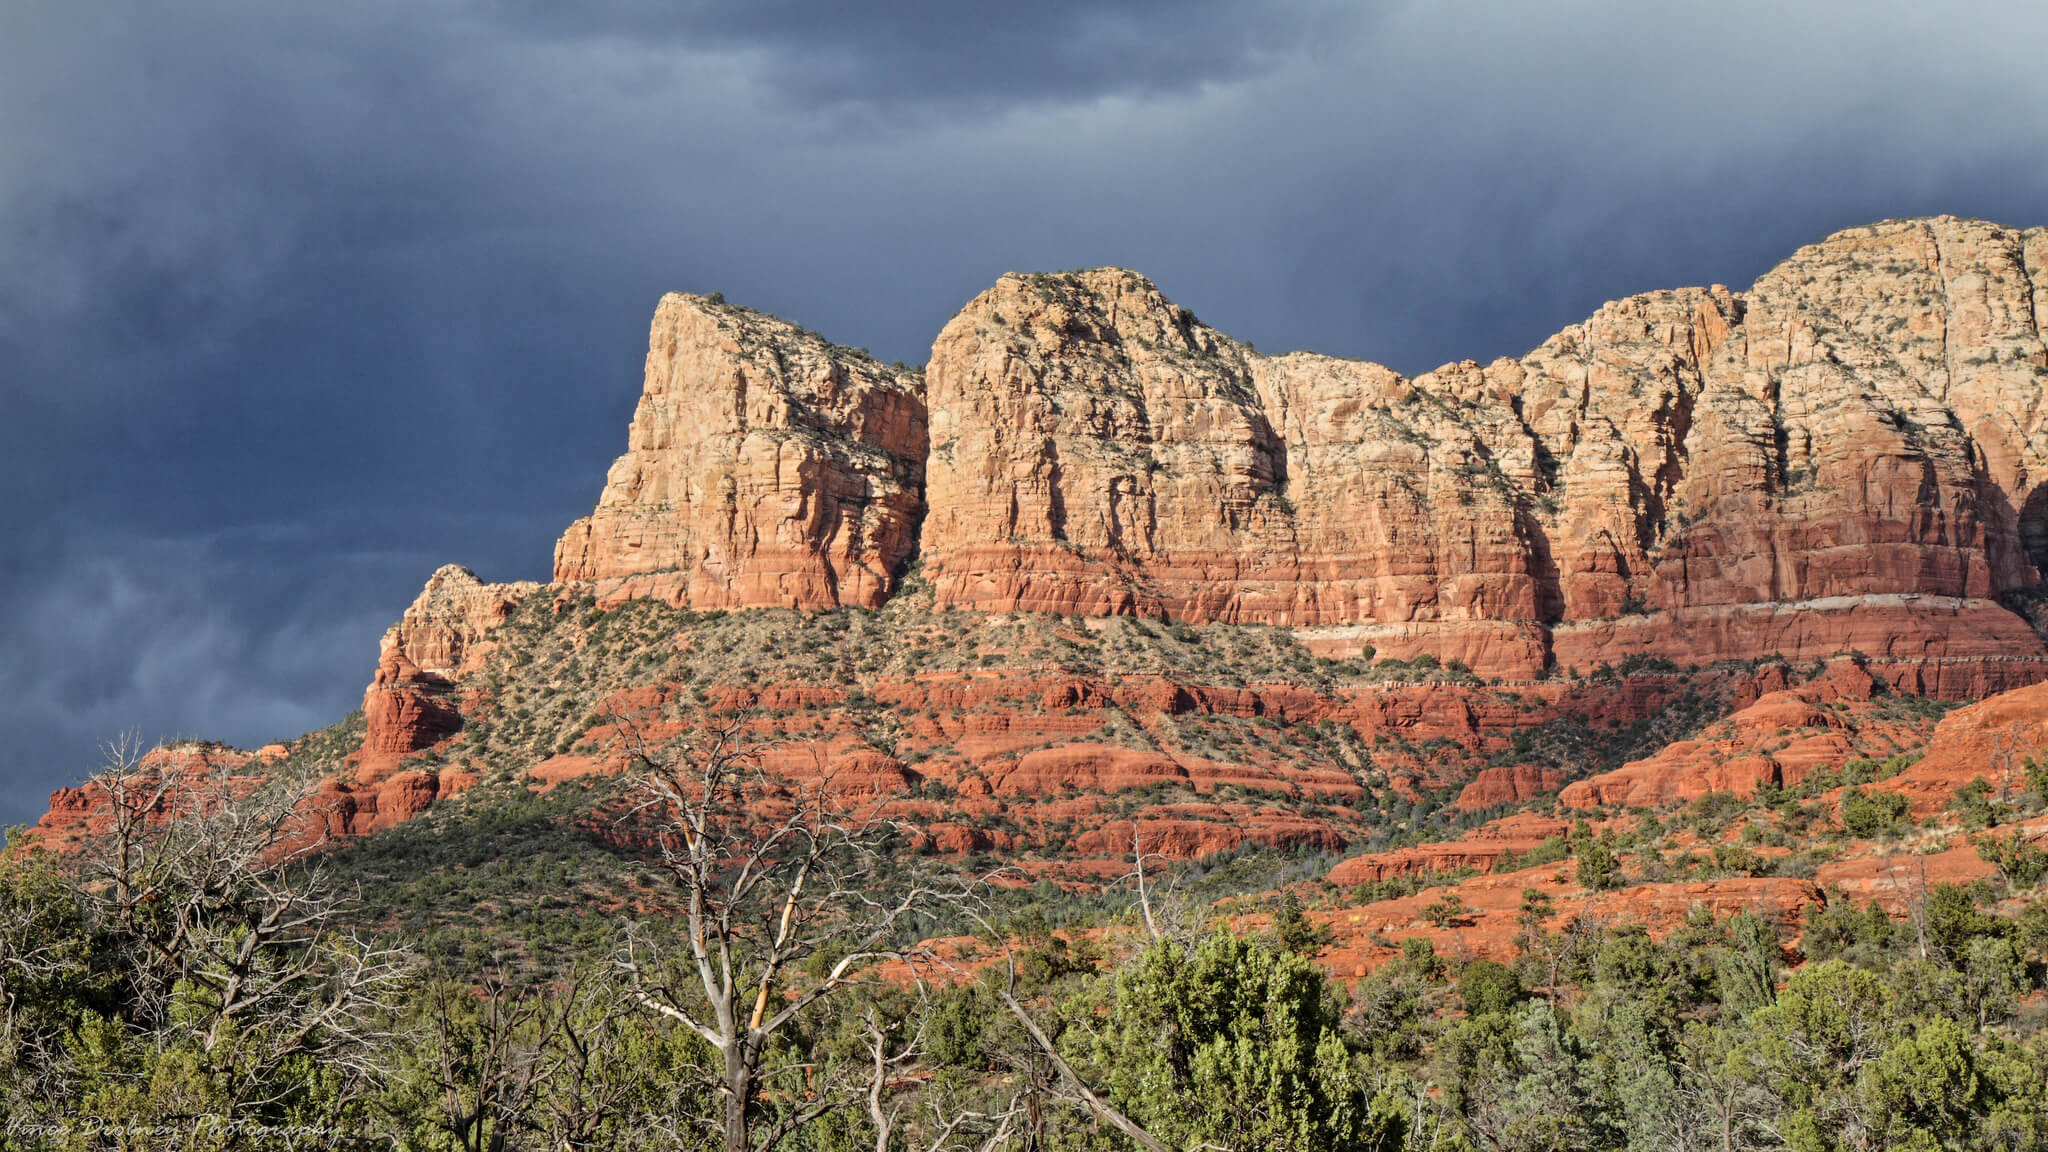 Clouds and rain are beautiful during monsoons in Sedona. Flickr User Vince Dropney